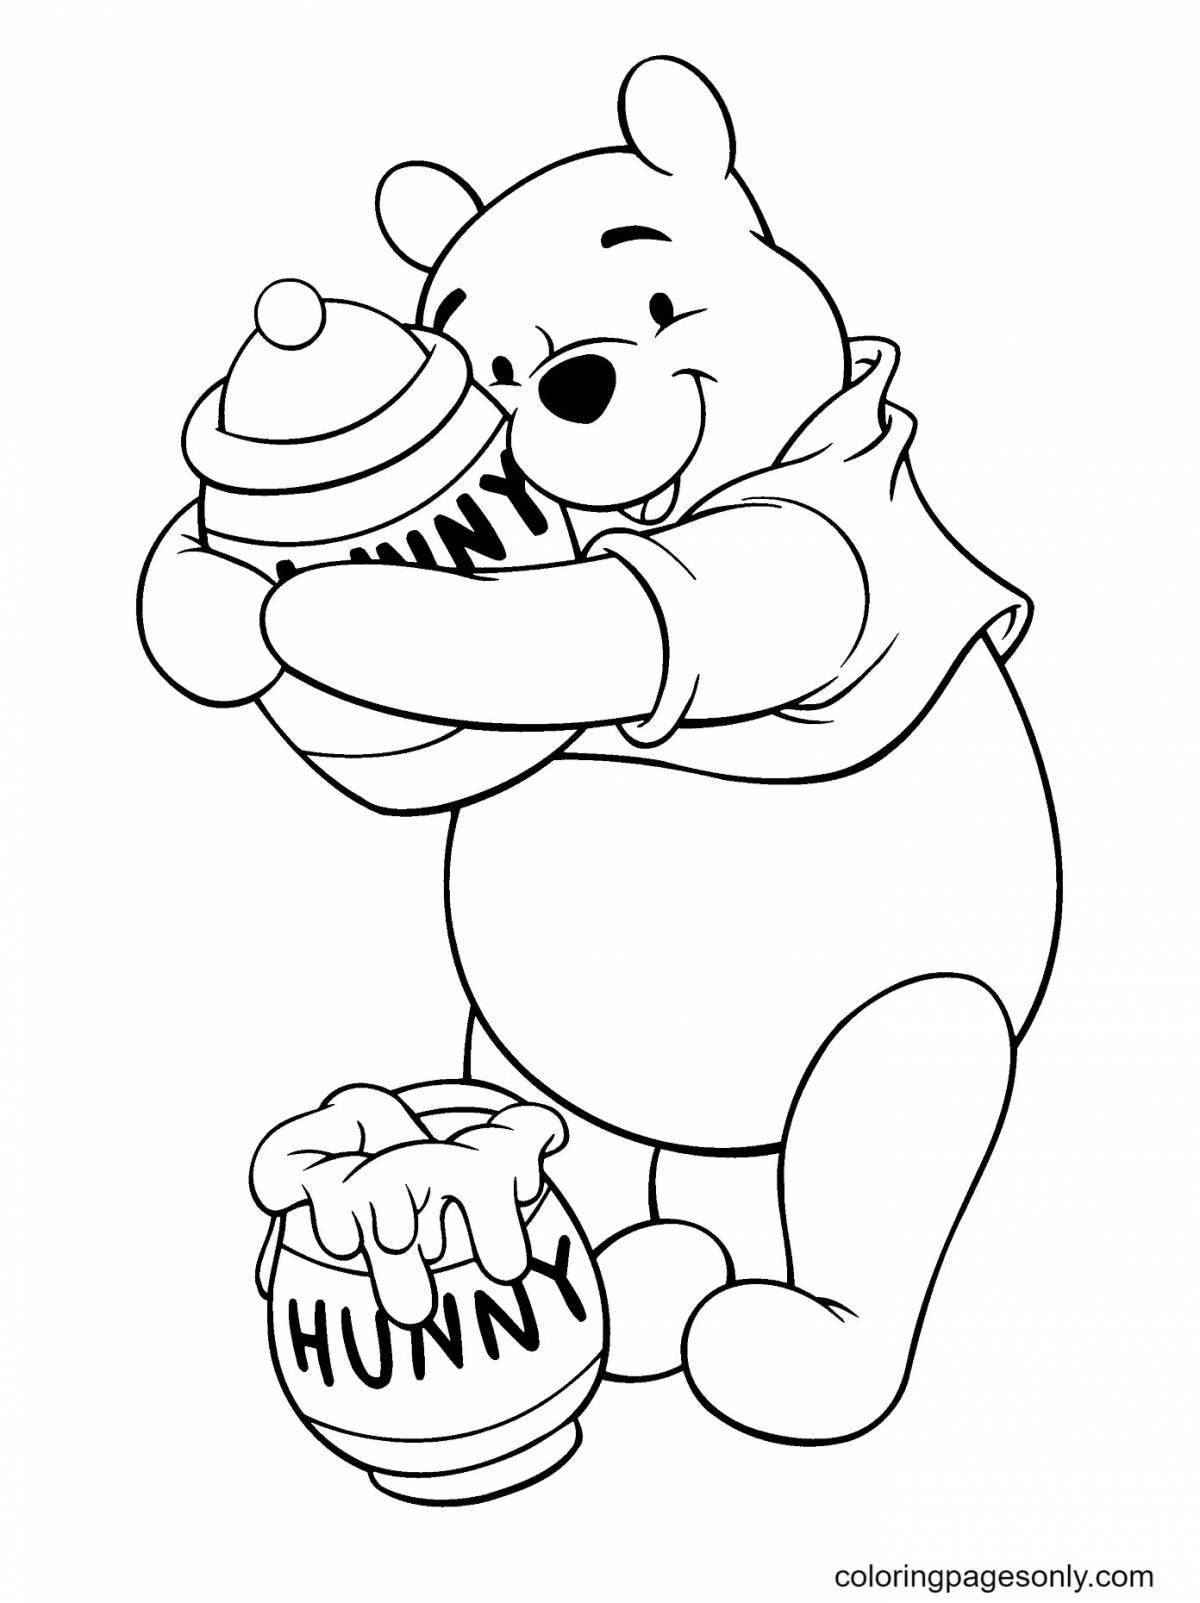 Animated fluff coloring page